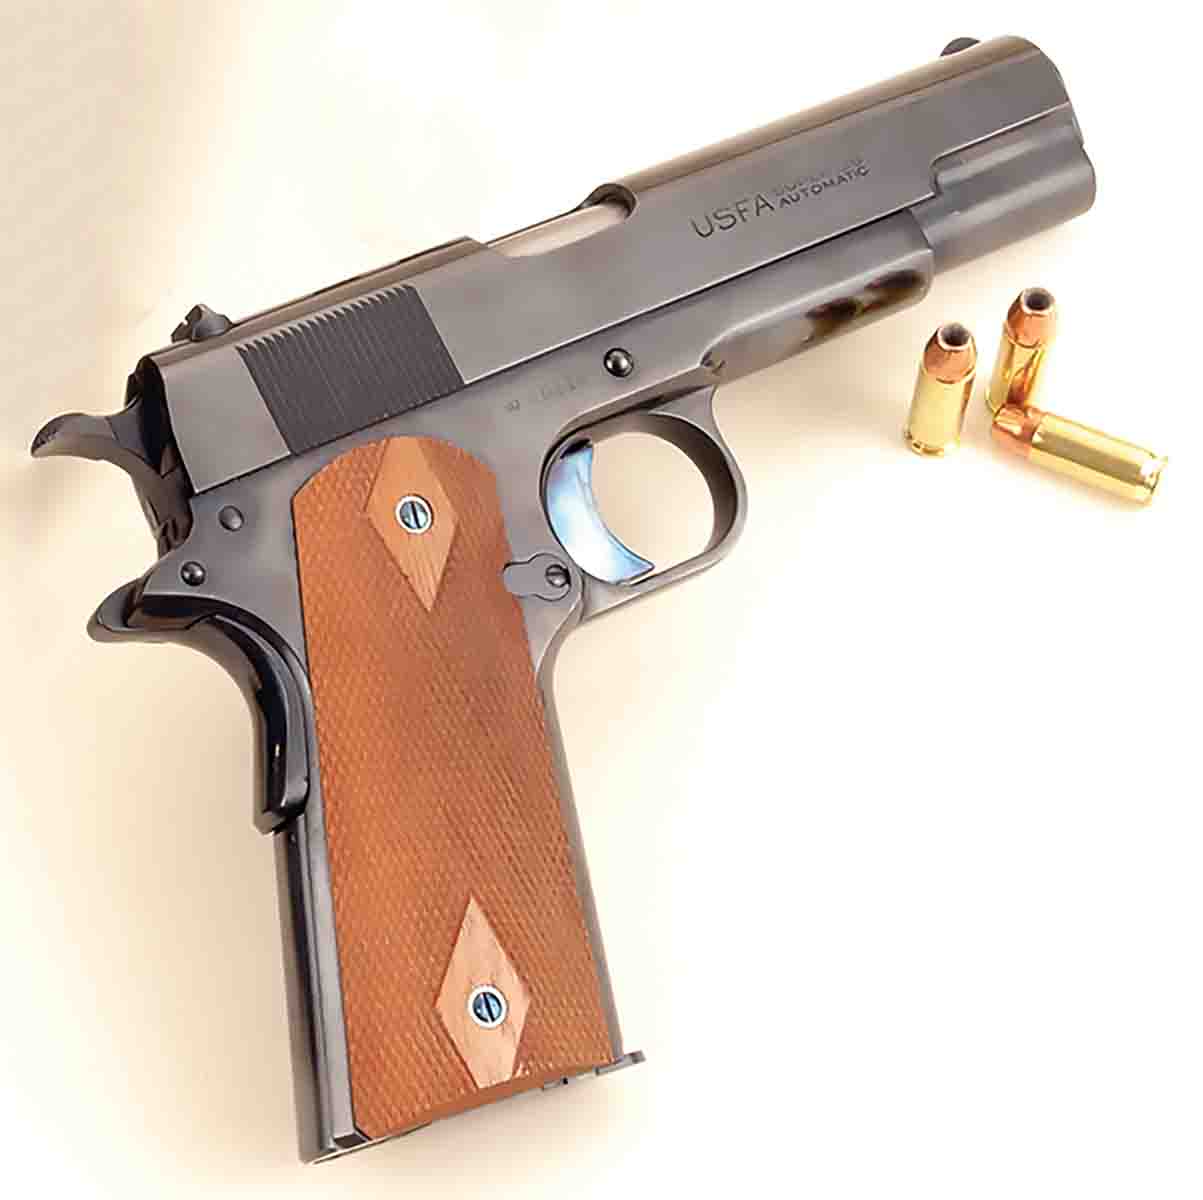 This now-defunct U.S. Fire Arms Manufacturing Company 38 Super semiauto was Mike’s only 38 Super pistol between his Star 38 Super circa 1970 and his Colt ELCEN.